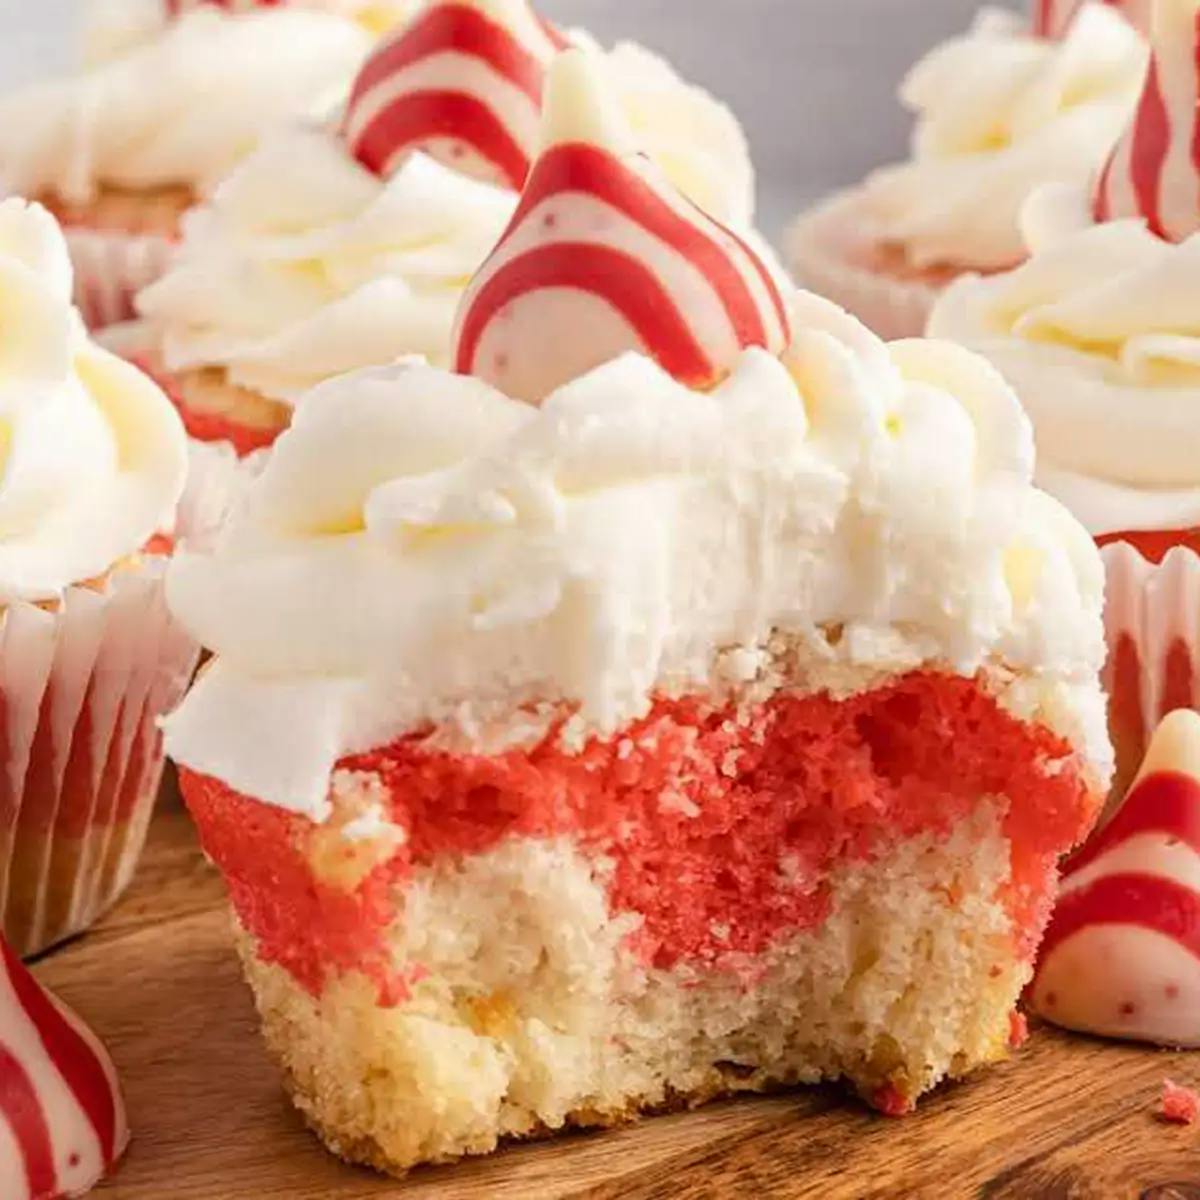 Red and white Christmas cupcake on cutting board, one with a piece taken out to reveal the striped inside of the cupcake. 